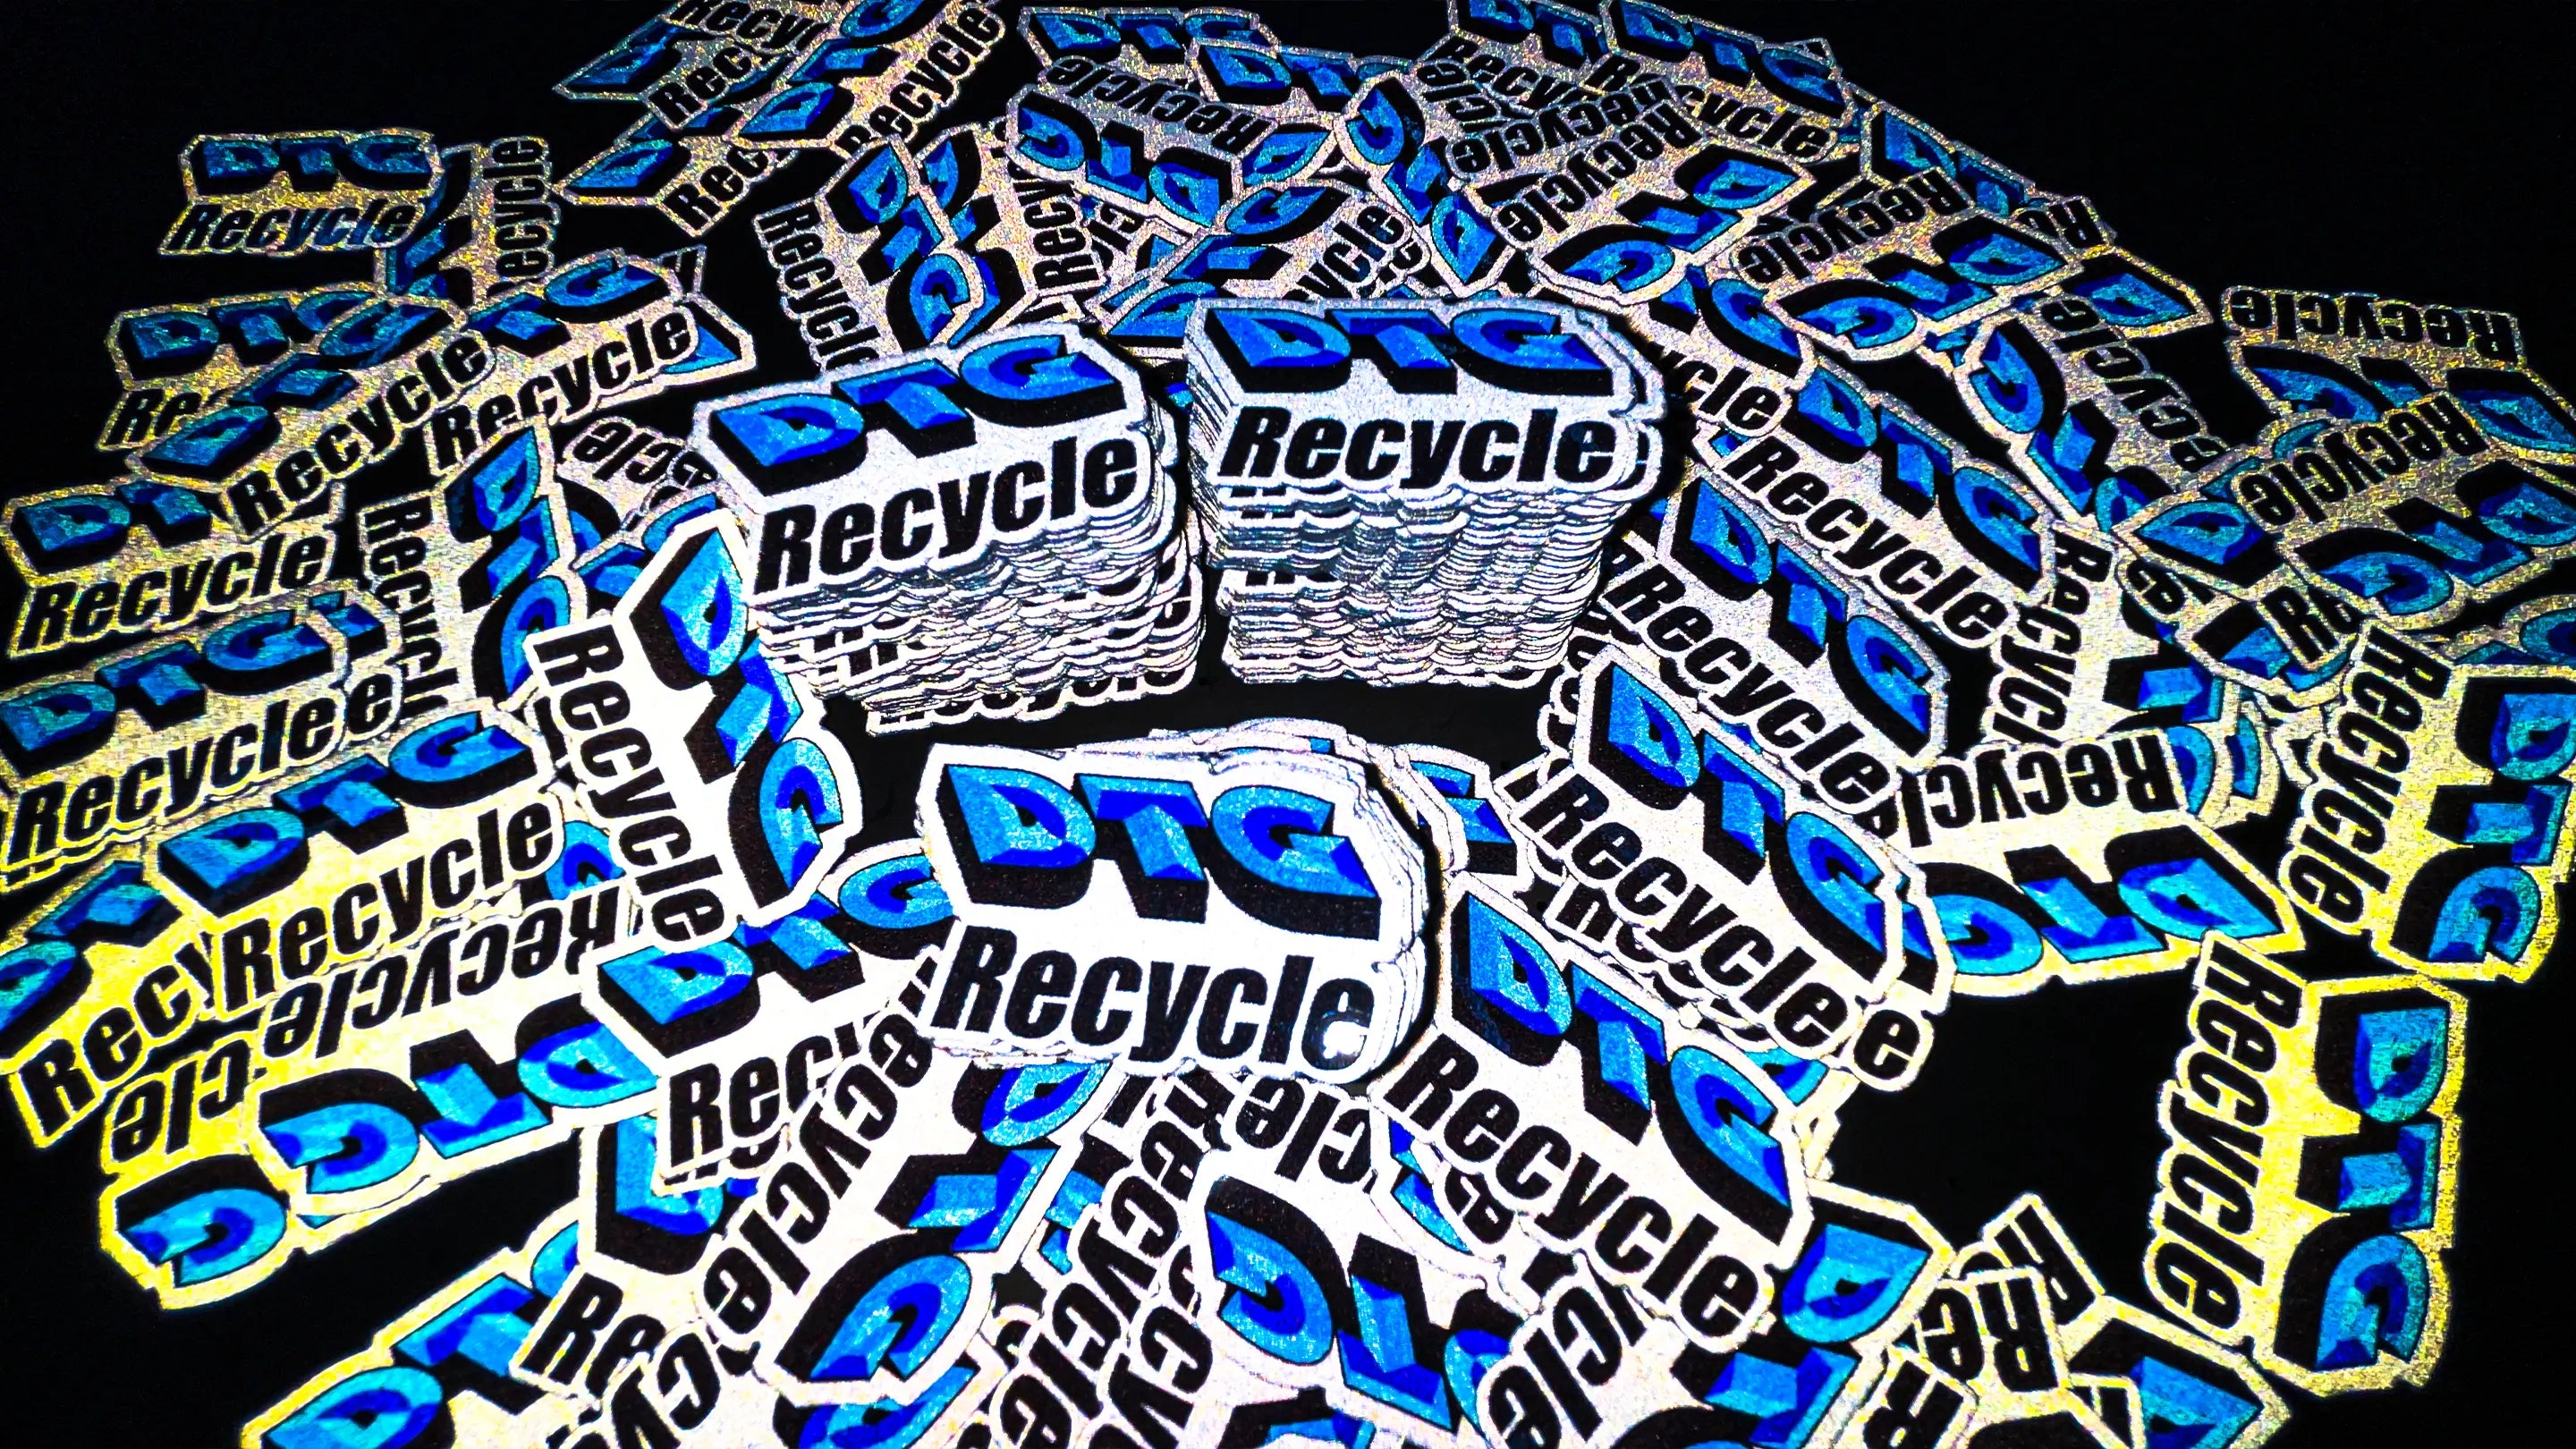 Custom printed reflective hard hat sticker we designed and printed for DTG Recycle in Bothell, WA